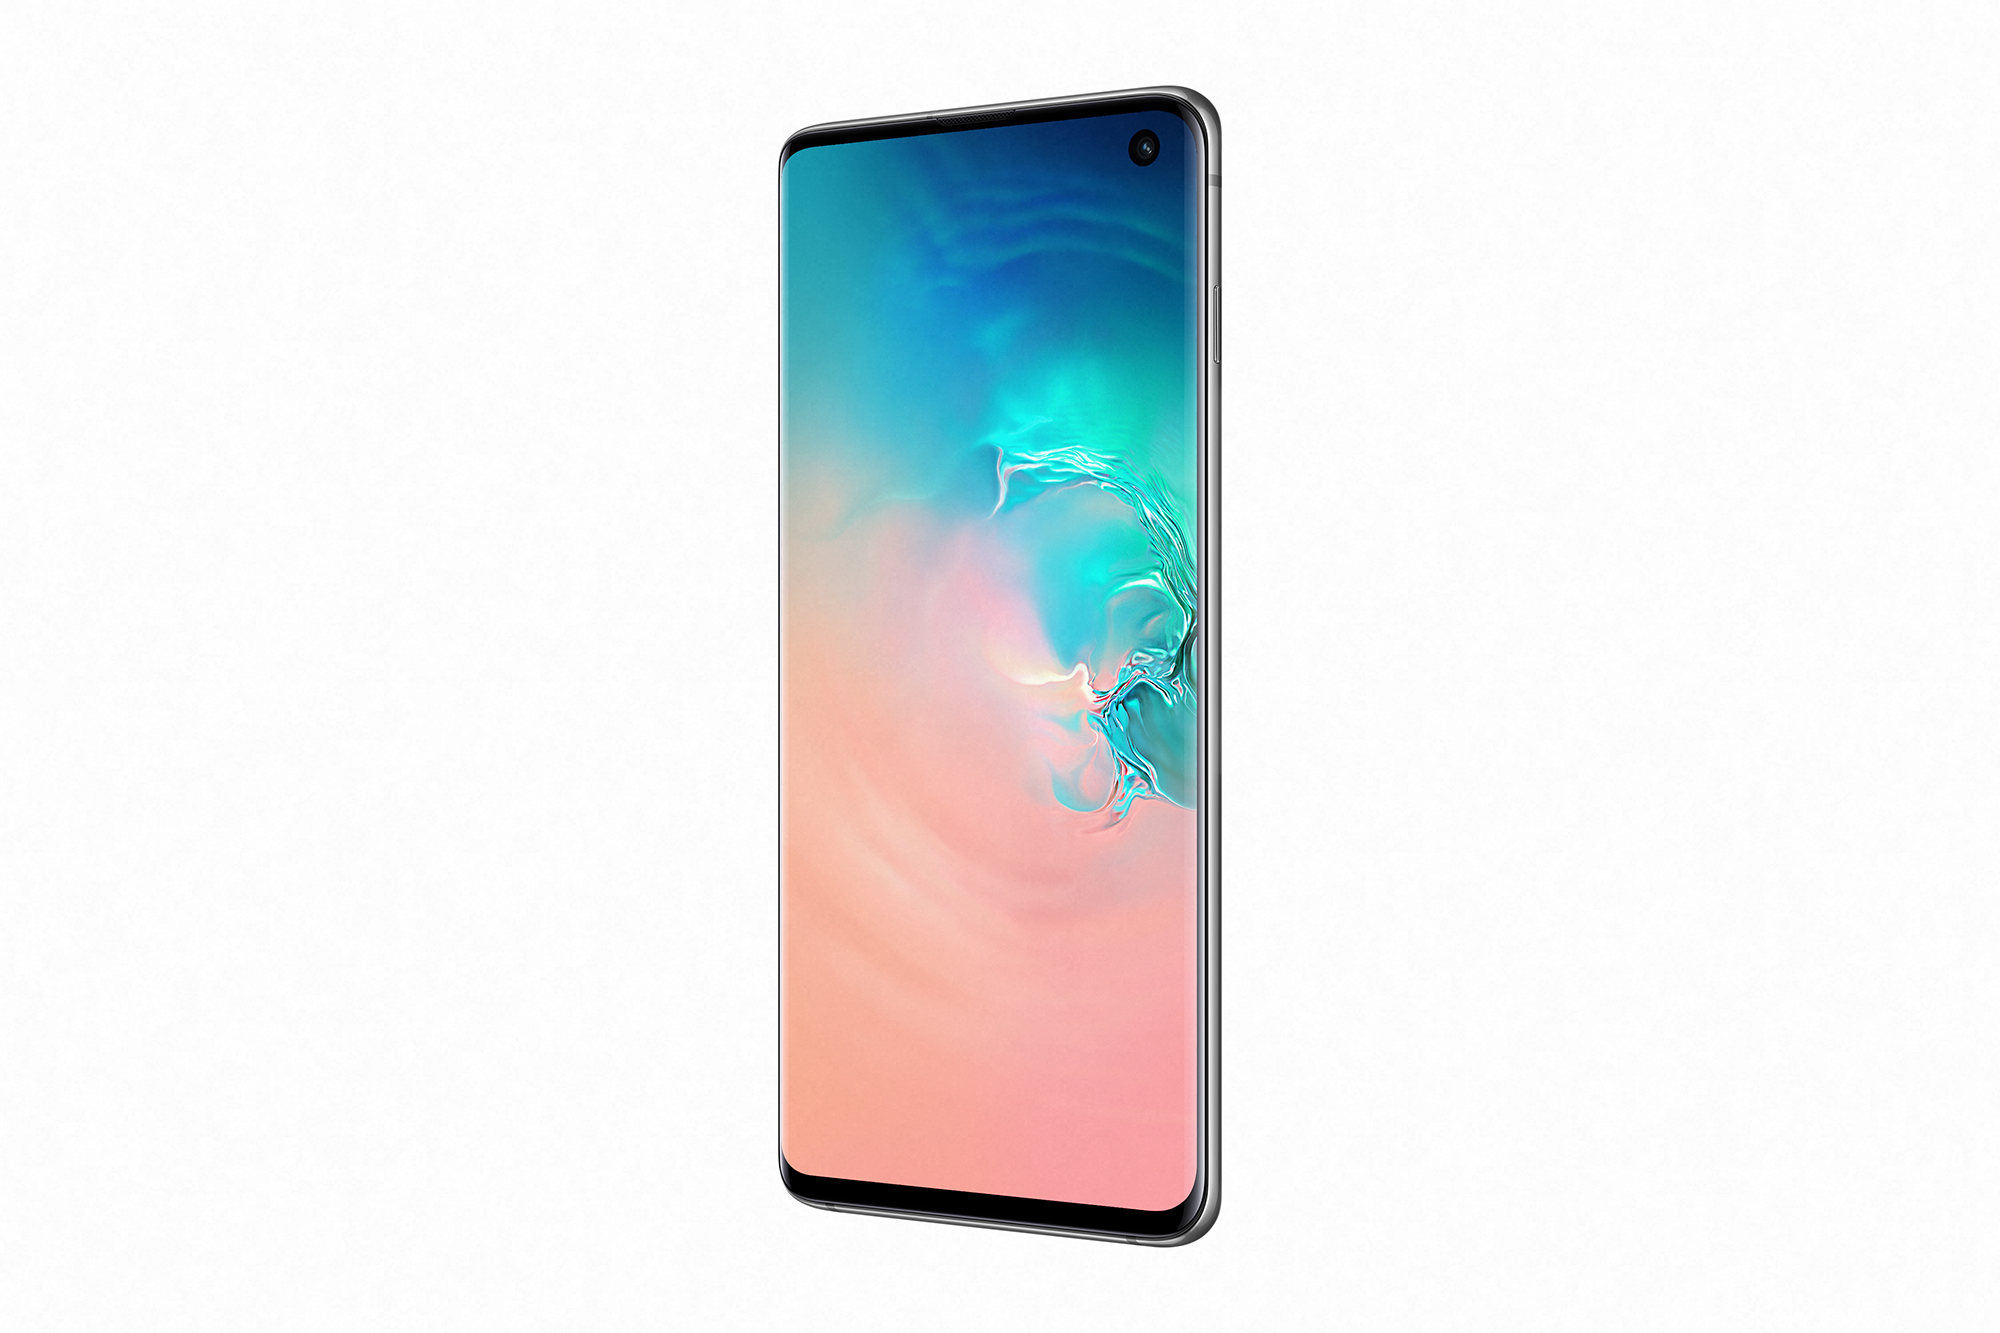 20_galaxys10_product_images_r30_white